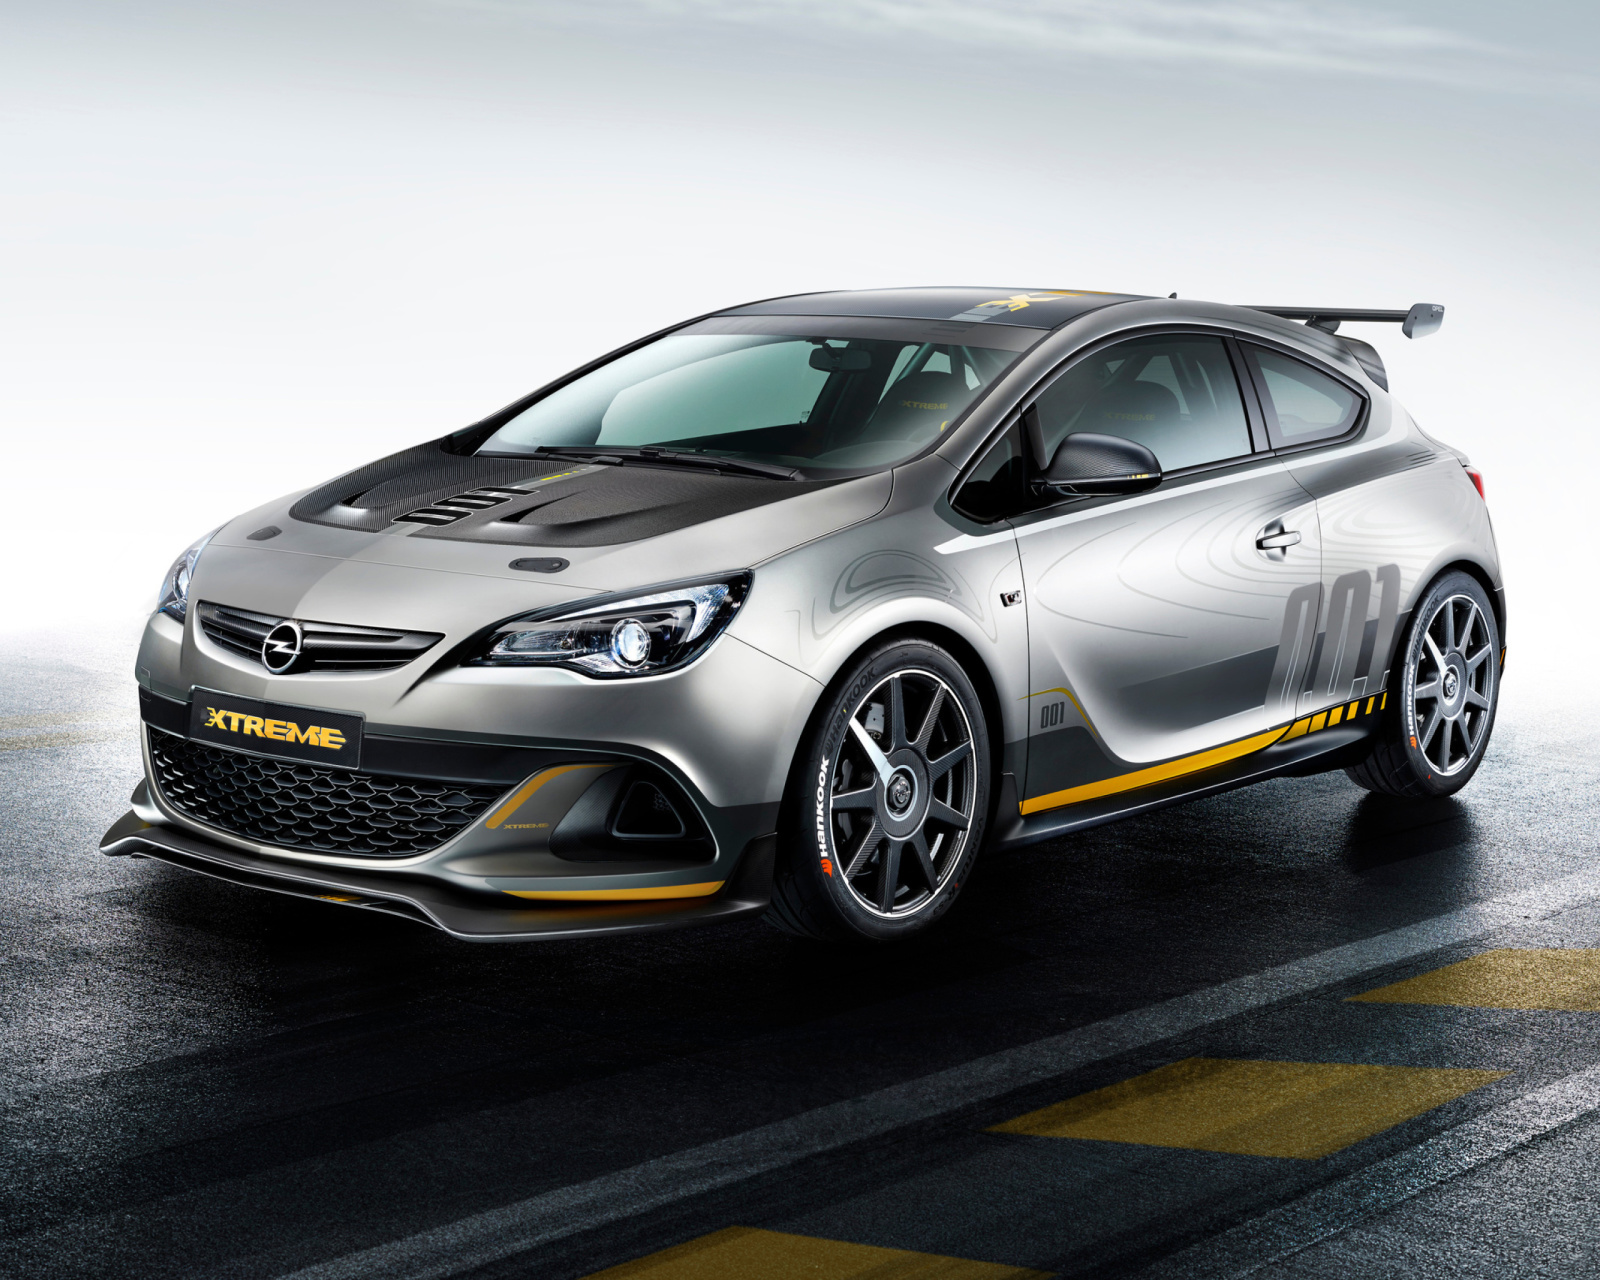 Opel Astra OPC Extreme wallpaper 1600x1280